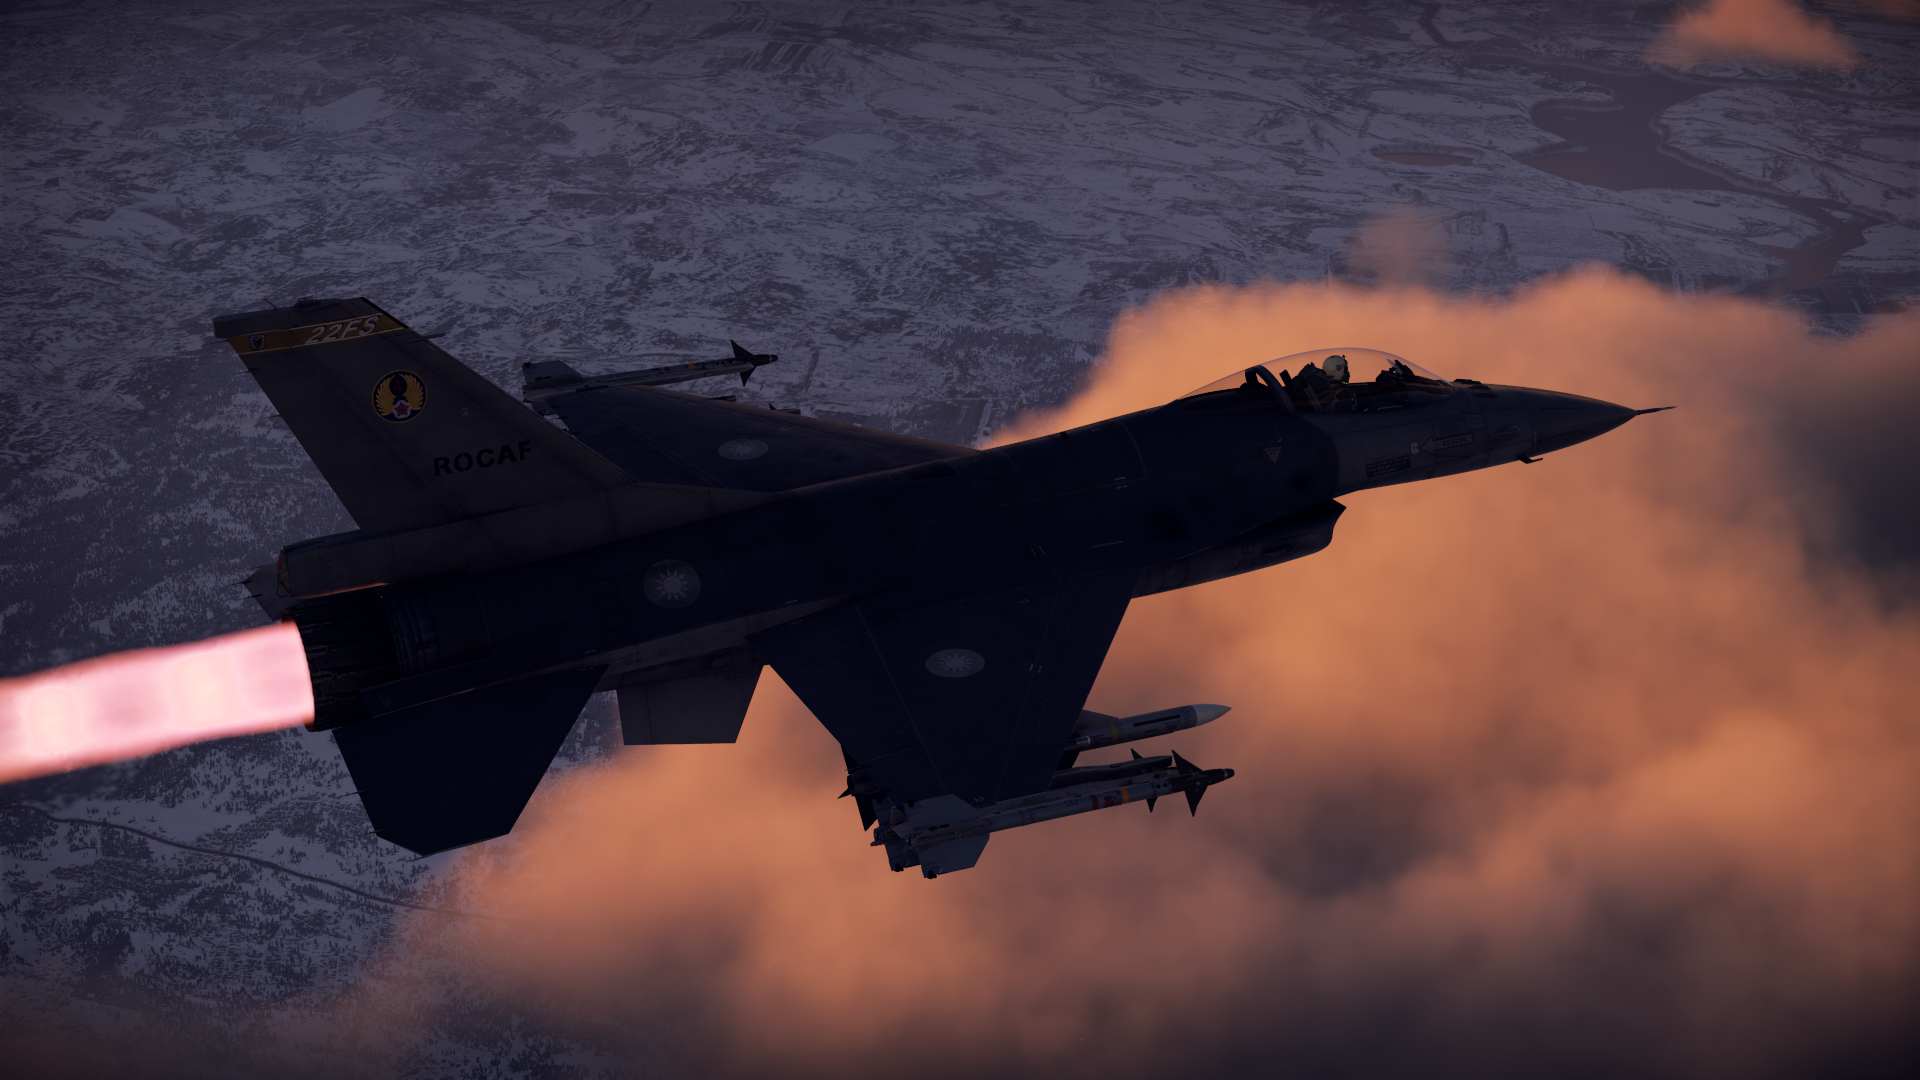 War Thunder General Dynamics F 16 Fighting Falcon Taiwanese Air Force Jet Fighter Planes Sunset Vide 1920x1080